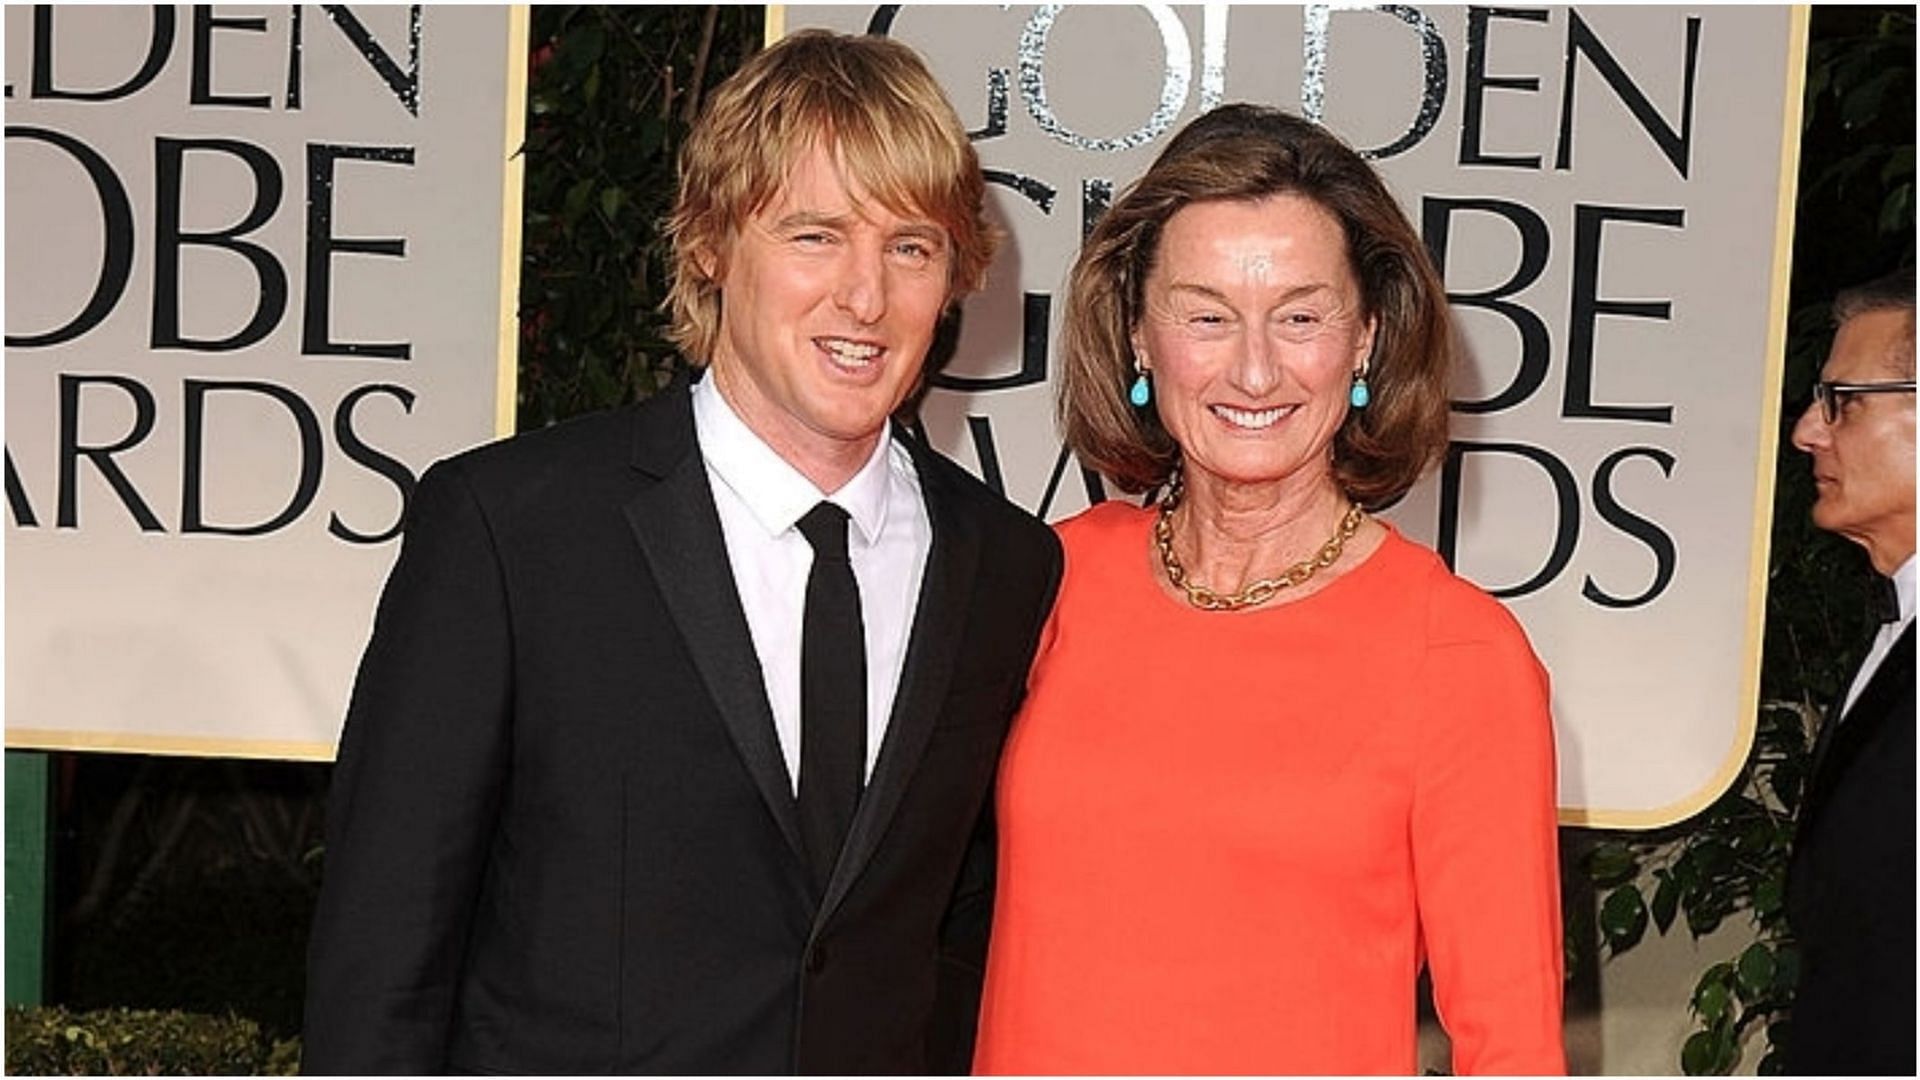 Owen Wilson unveiled that his mother remarried at the age of 80 (Image via Steve Granitz/Getty Images)